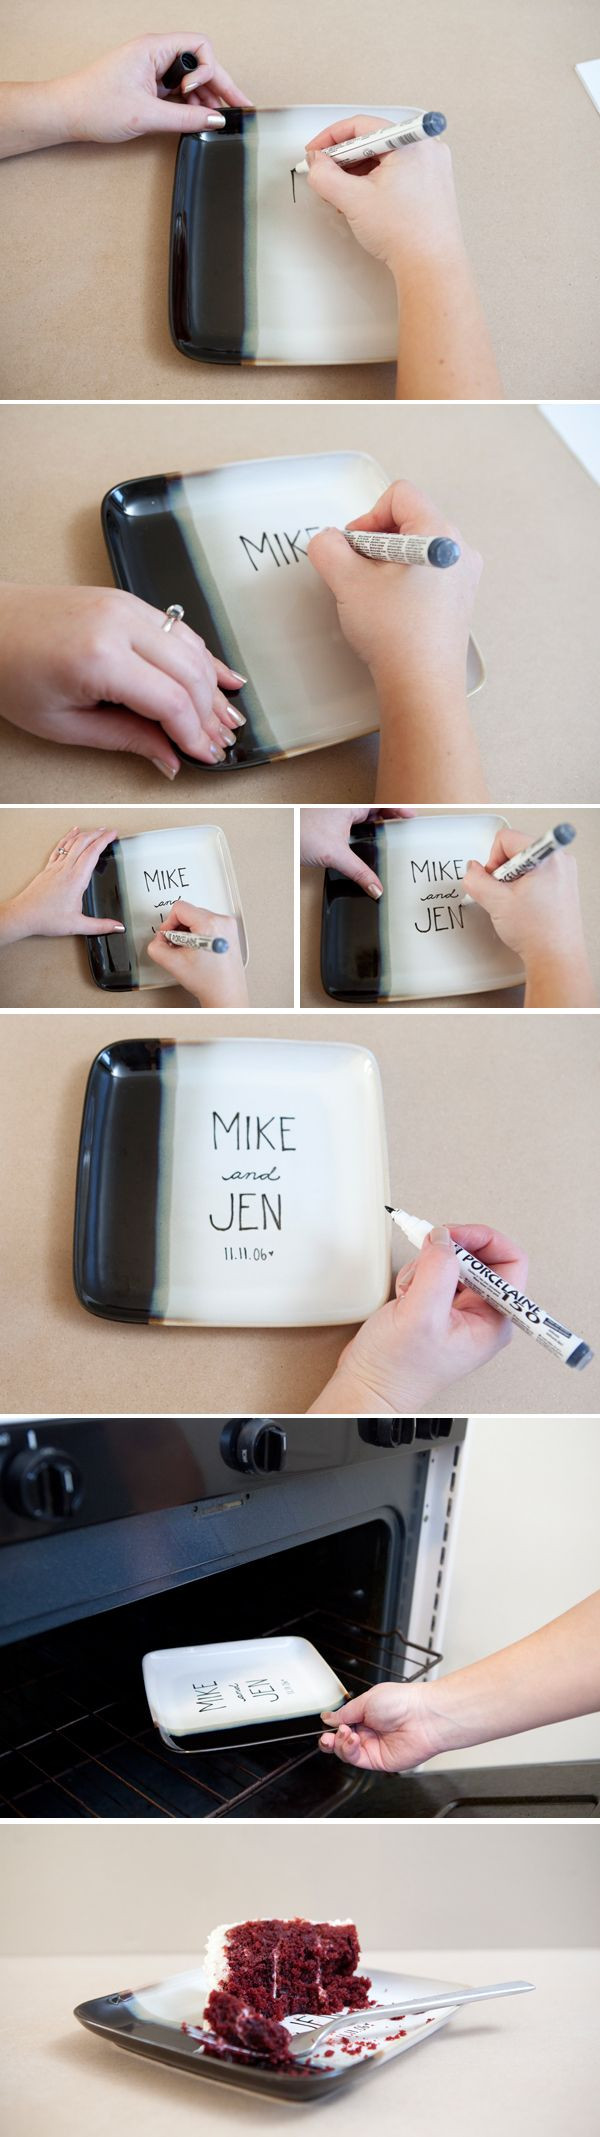 Wedding Gifts For Attendants
 How to make a custom DIY wedding cake plate